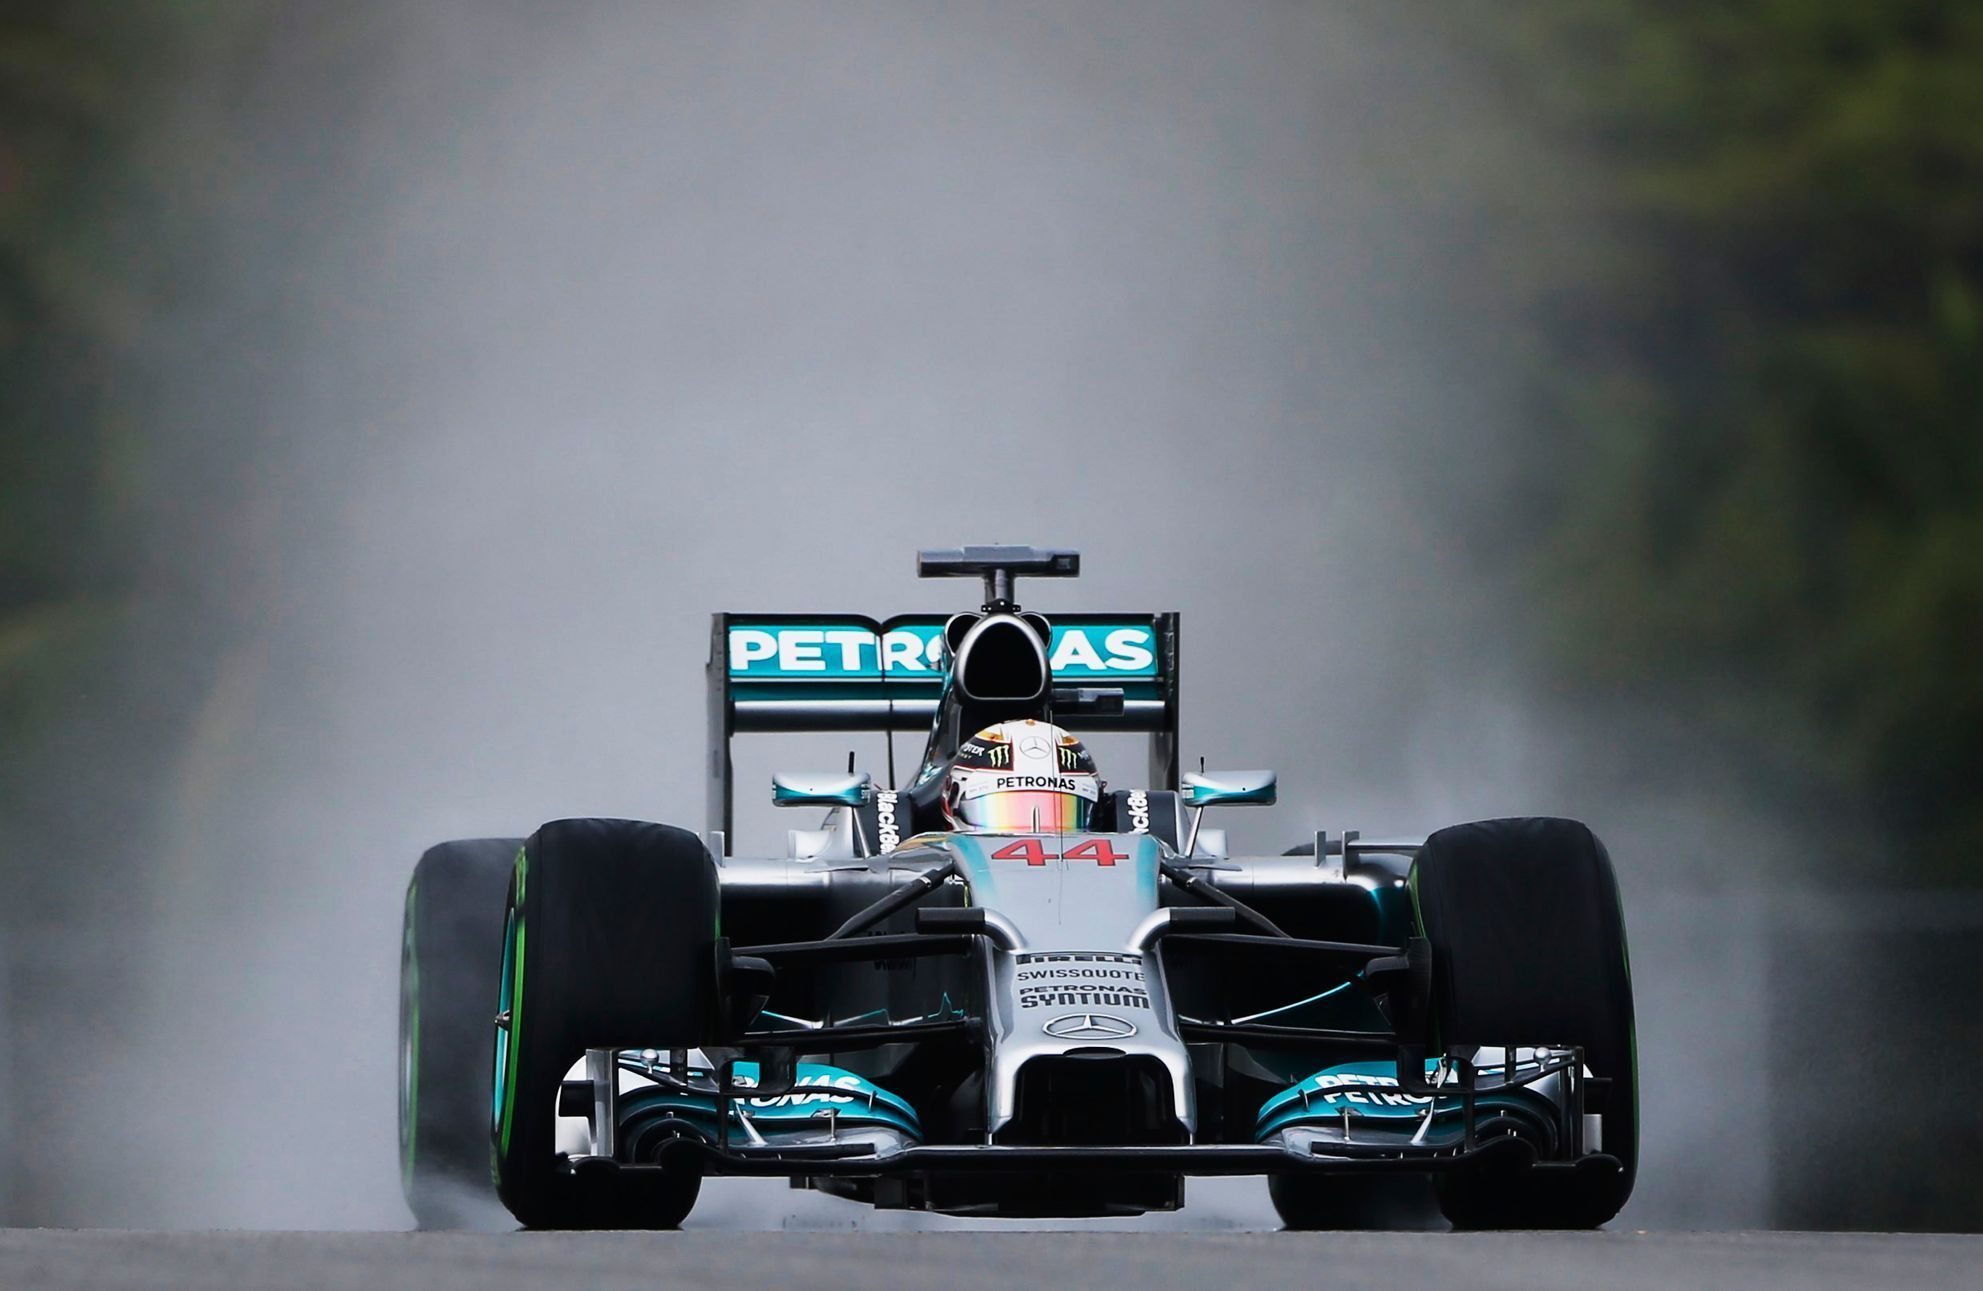 Mercedes Formula One driver Hamilton of Britain drives during the qualifying session for the Malaysian F1 Grand Prix at Sepang International Circuit outside Kuala Lumpur